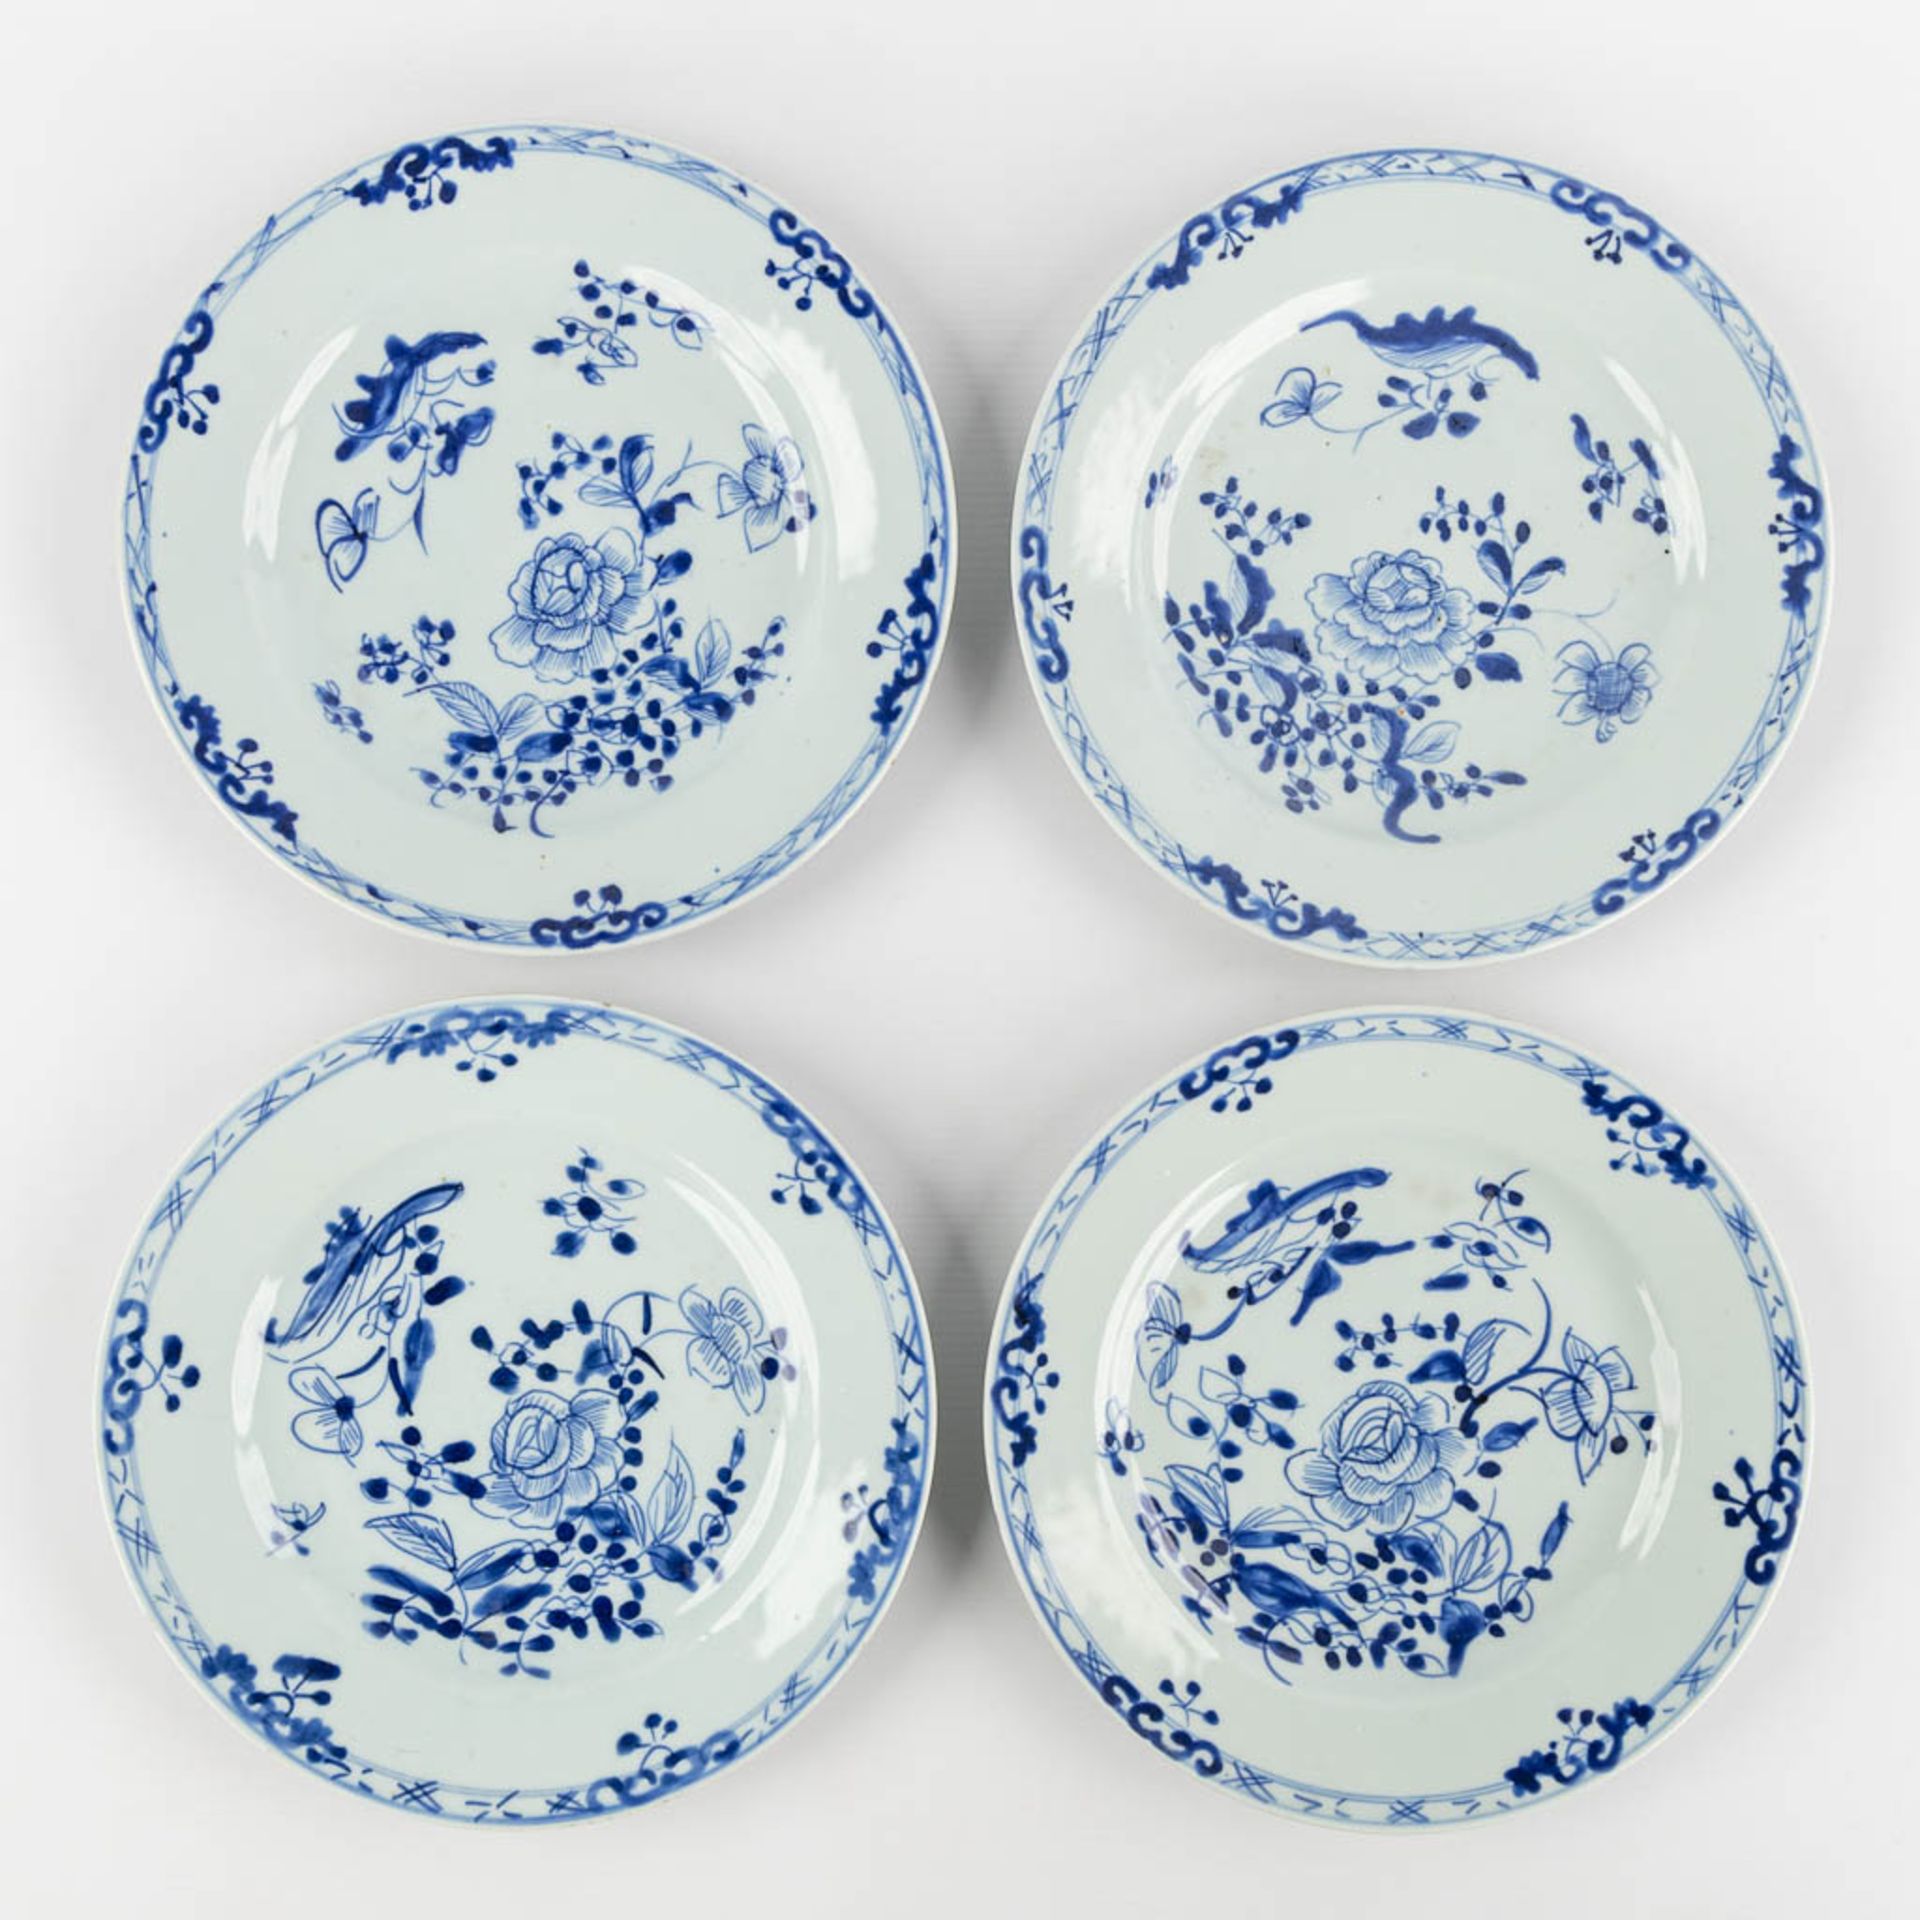 Fifteen Chinese cups, saucers and plates, blue white and Famille Roze. (D:23,4 cm) - Bild 3 aus 15